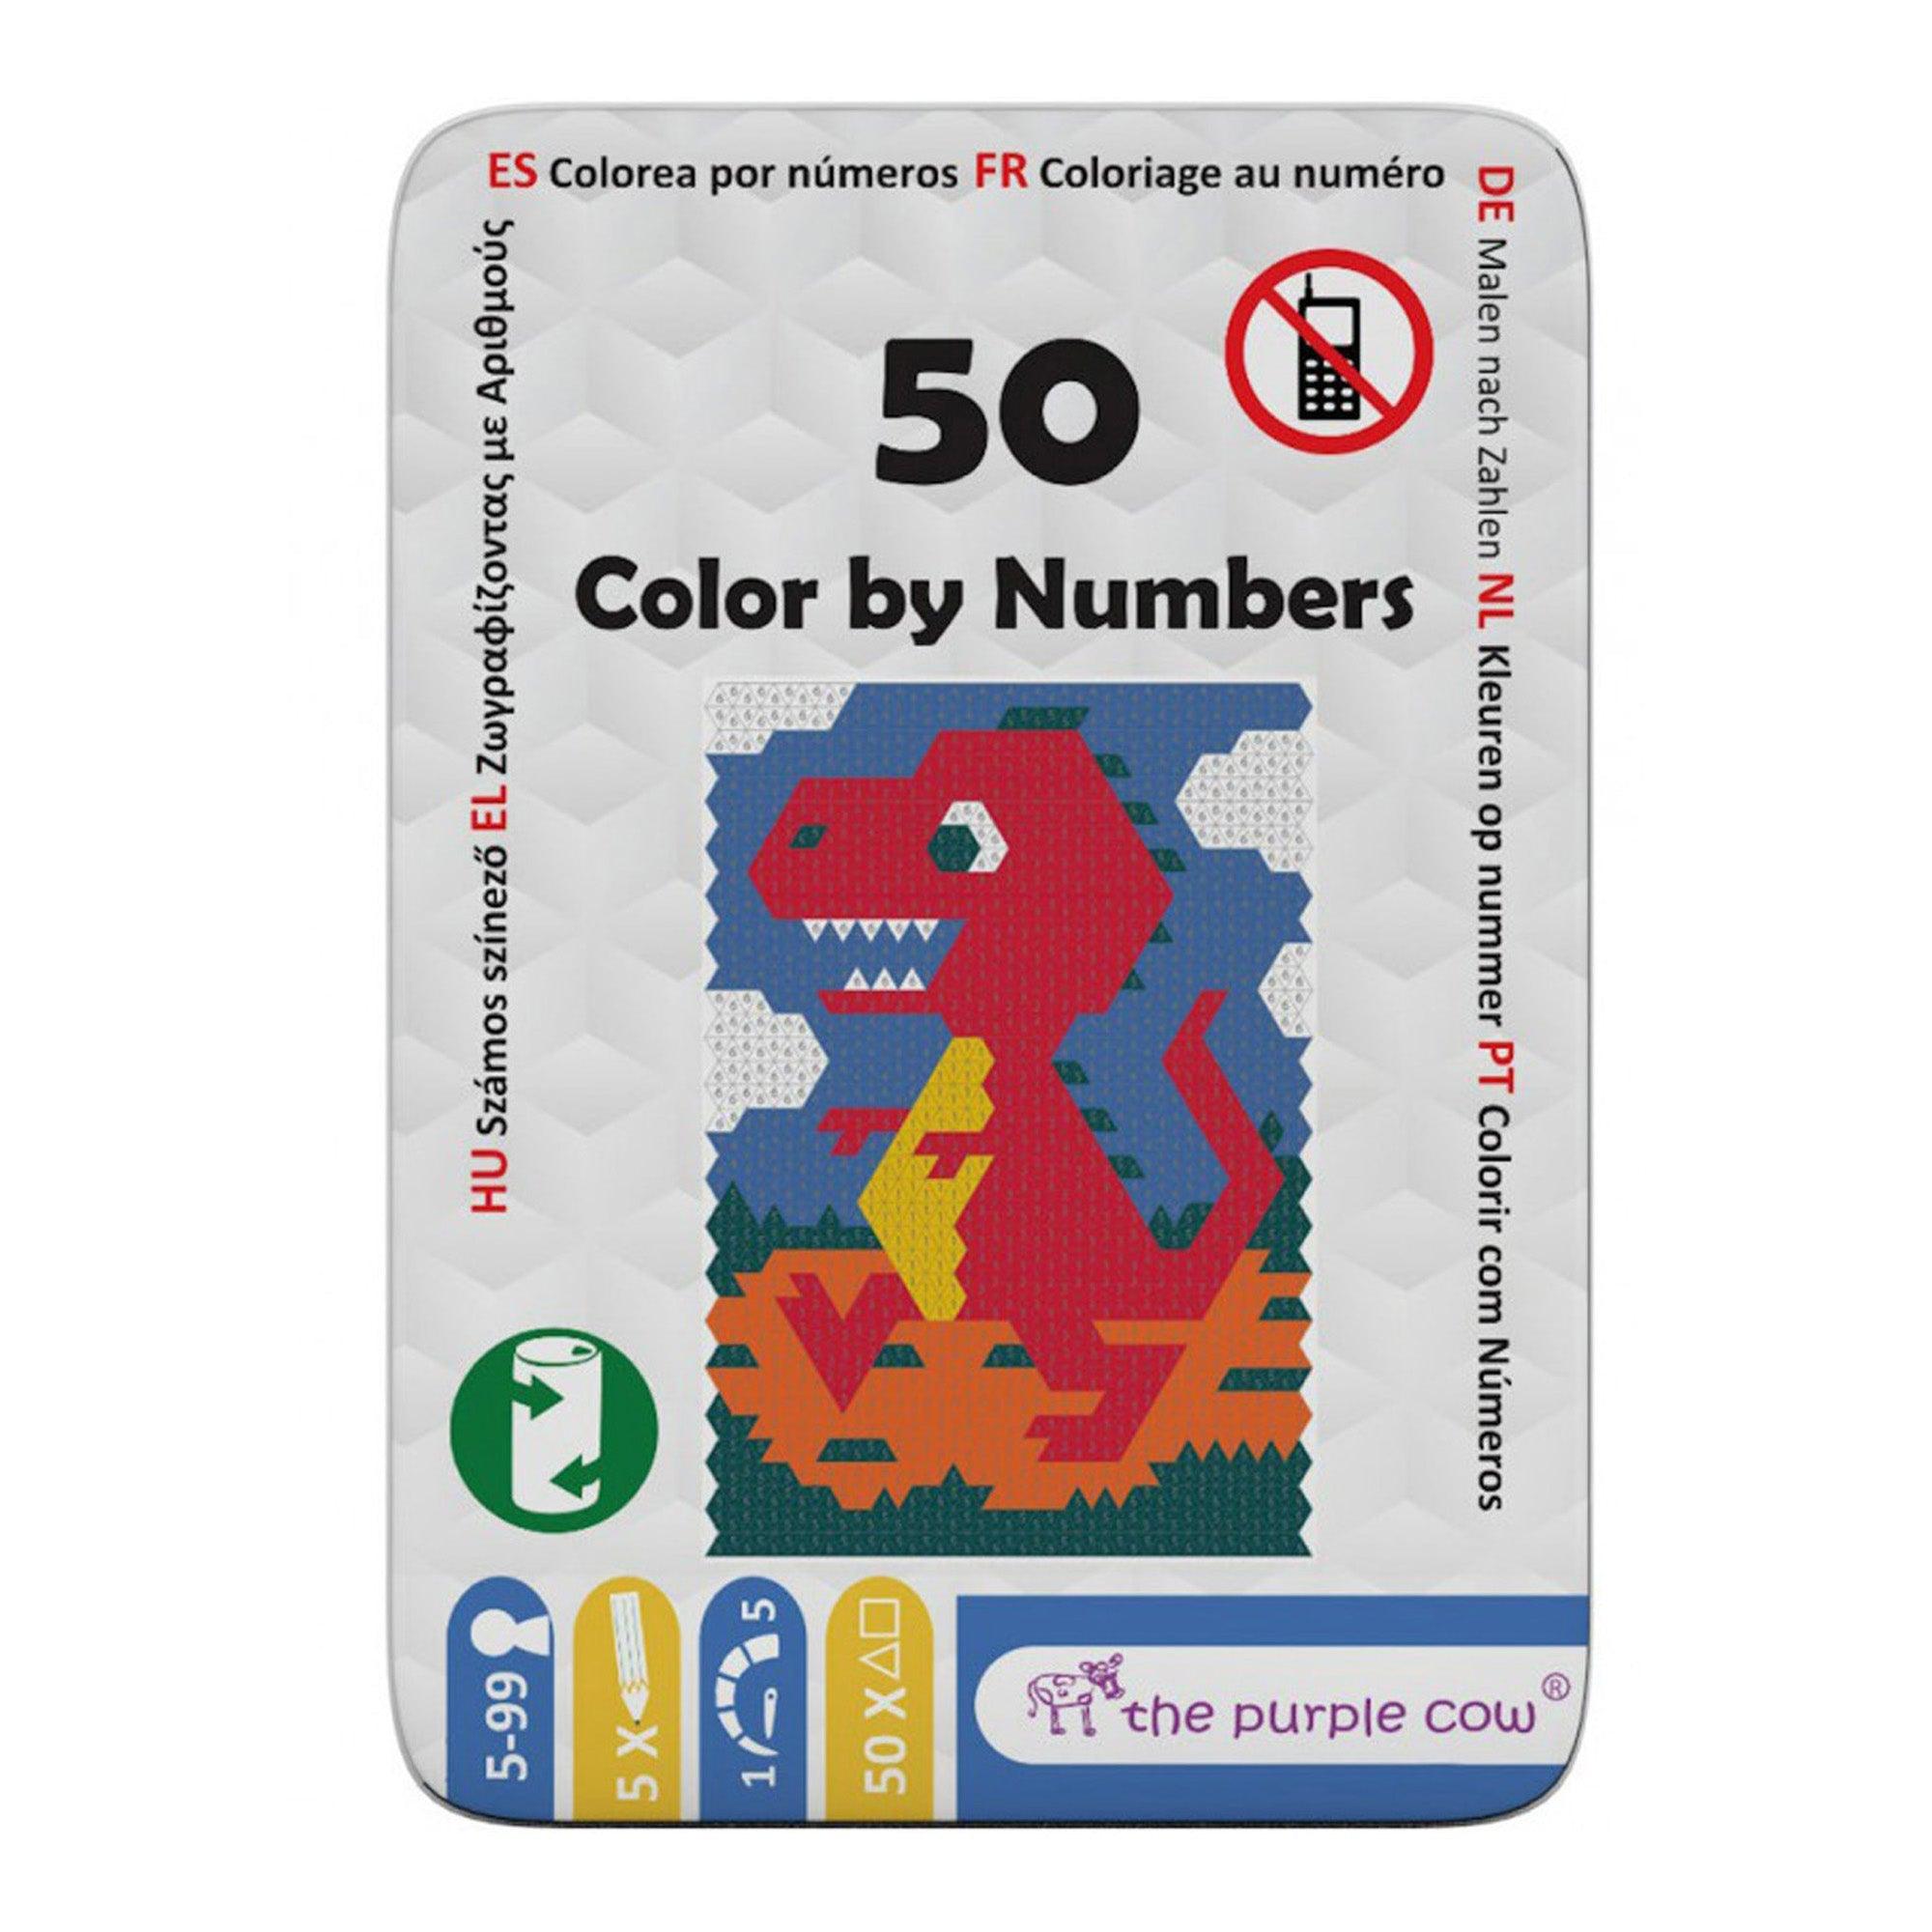 The Purple Cow: Travel Book Color 50 Color by Number